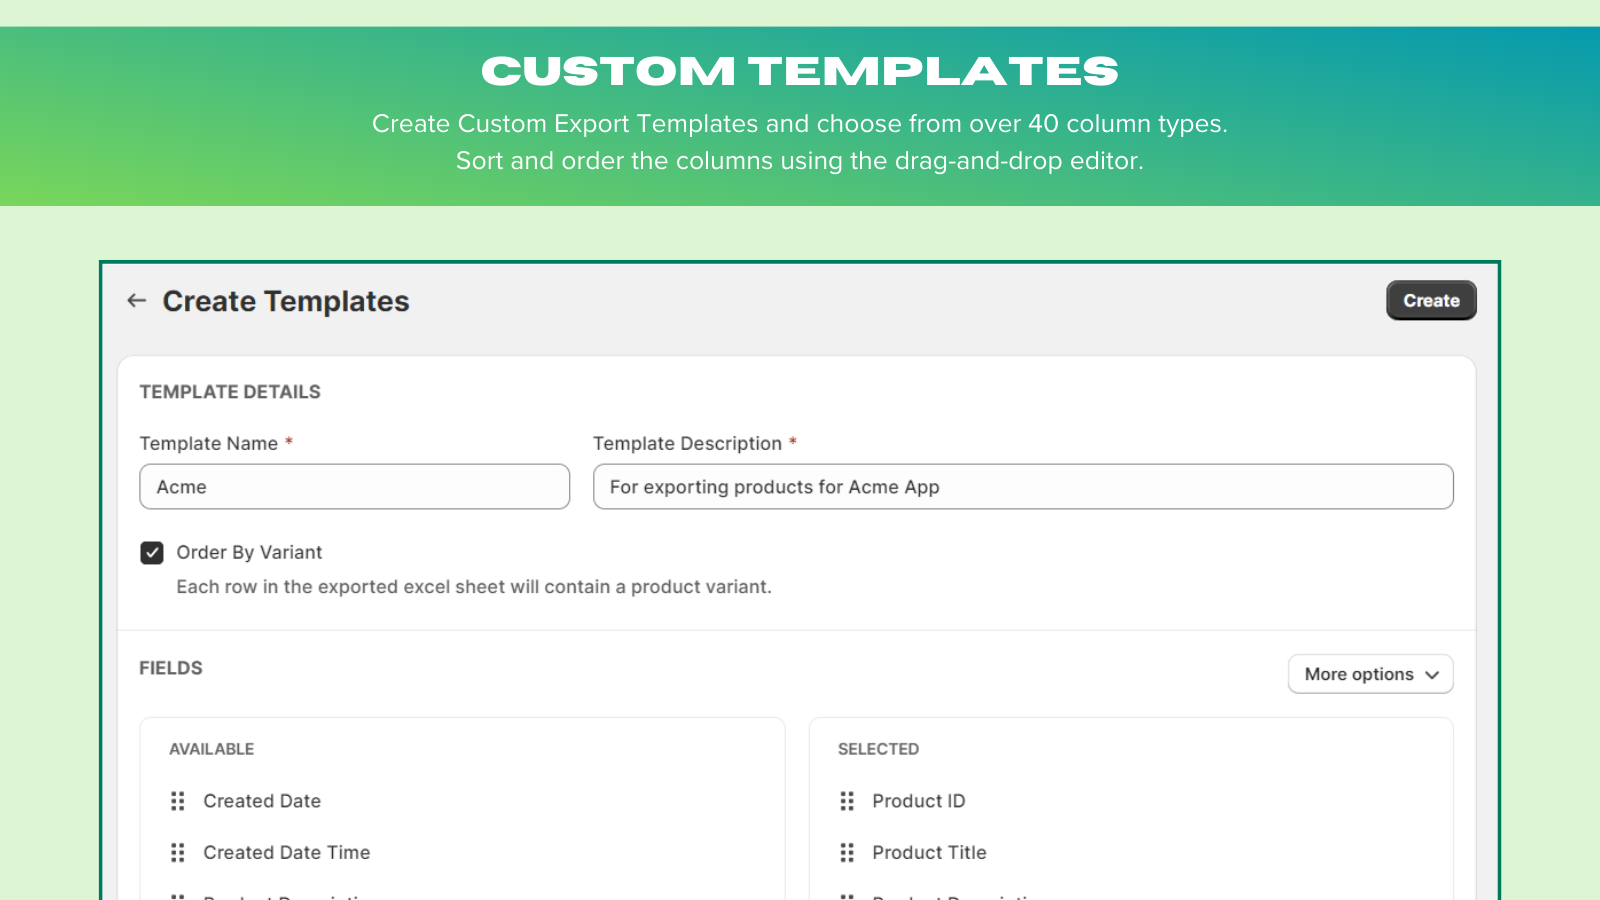 Create Custom Template for Exporting Products.